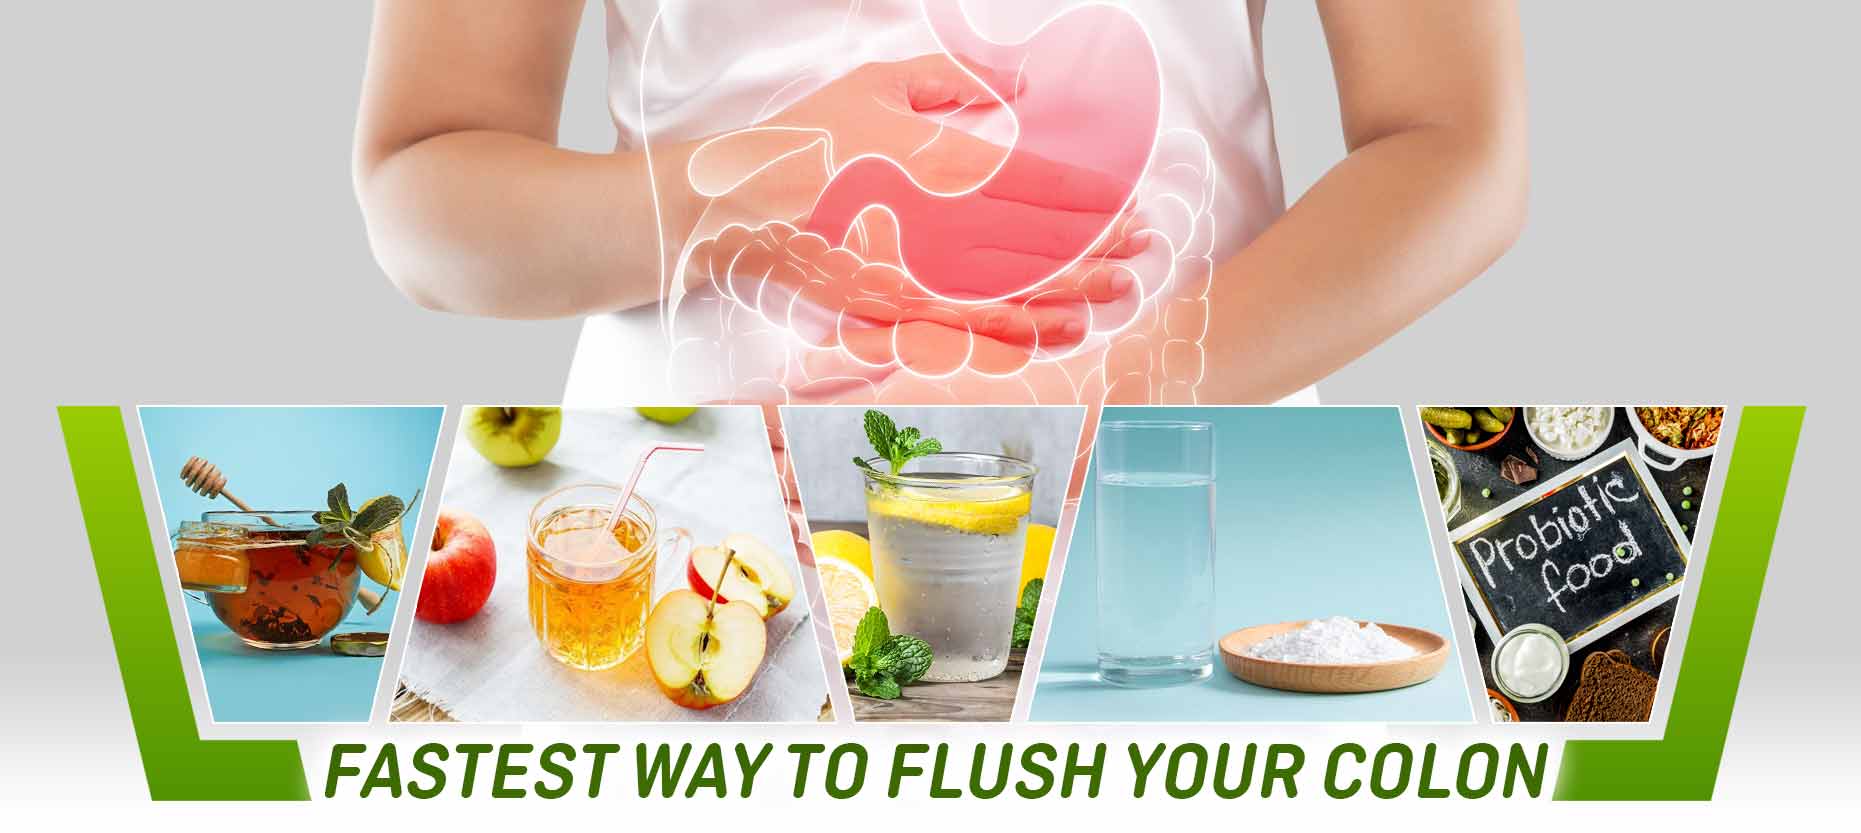 Fastest Way to Flush Your Colon